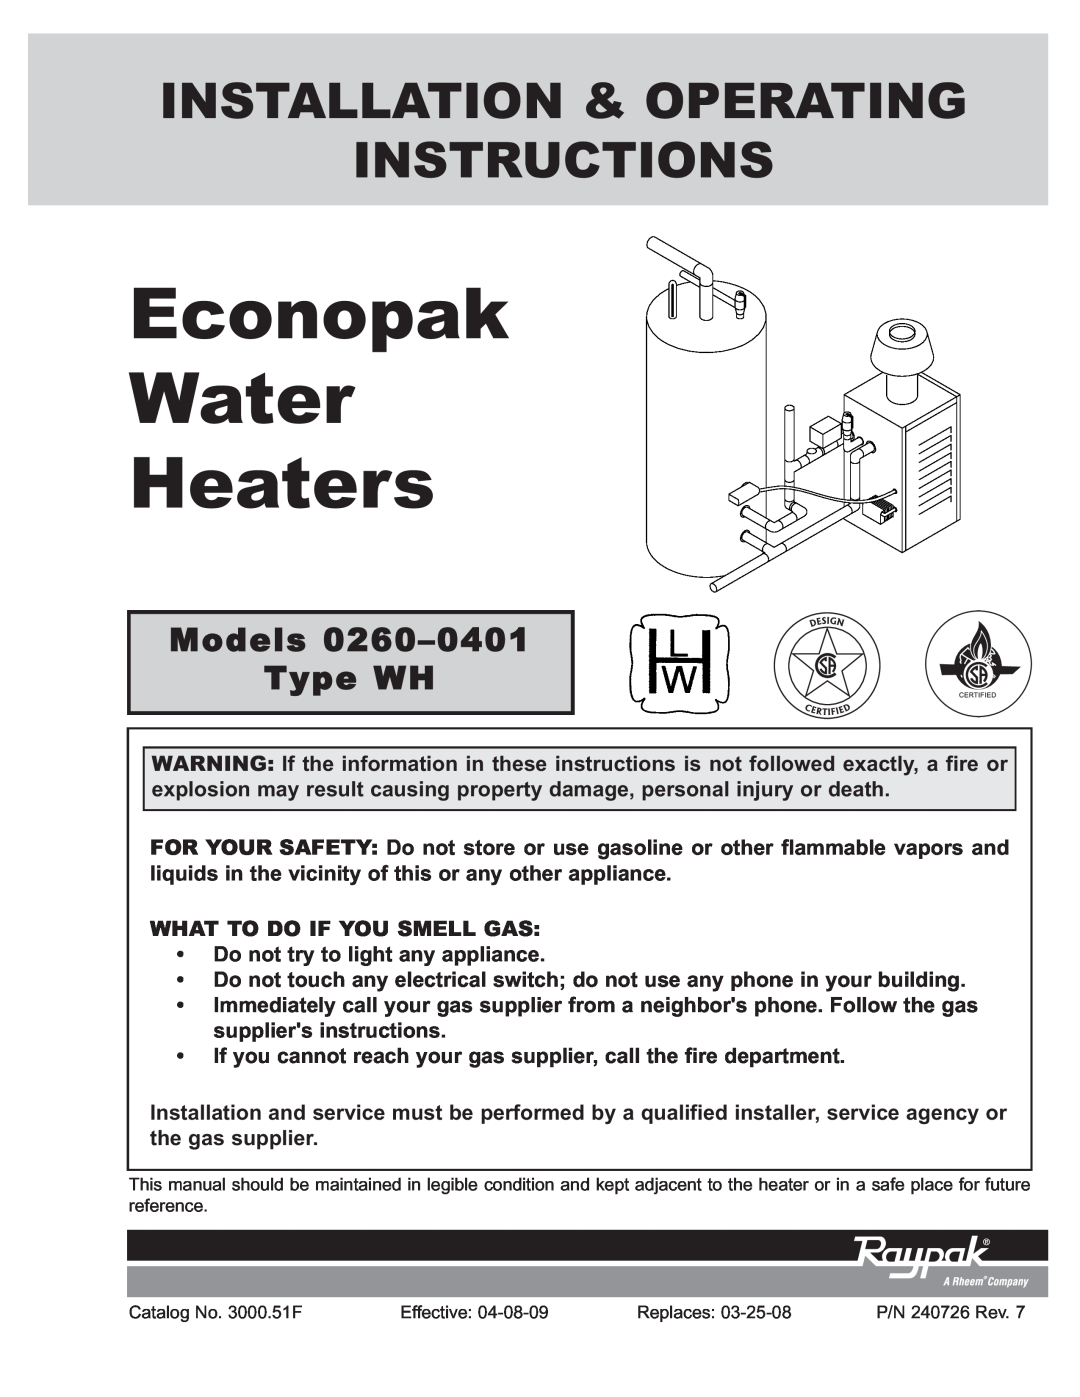 Raypak 2600401 operating instructions Models 0260-0401 Type WH, What To Do If You Smell Gas, Econopak Water Heaters 